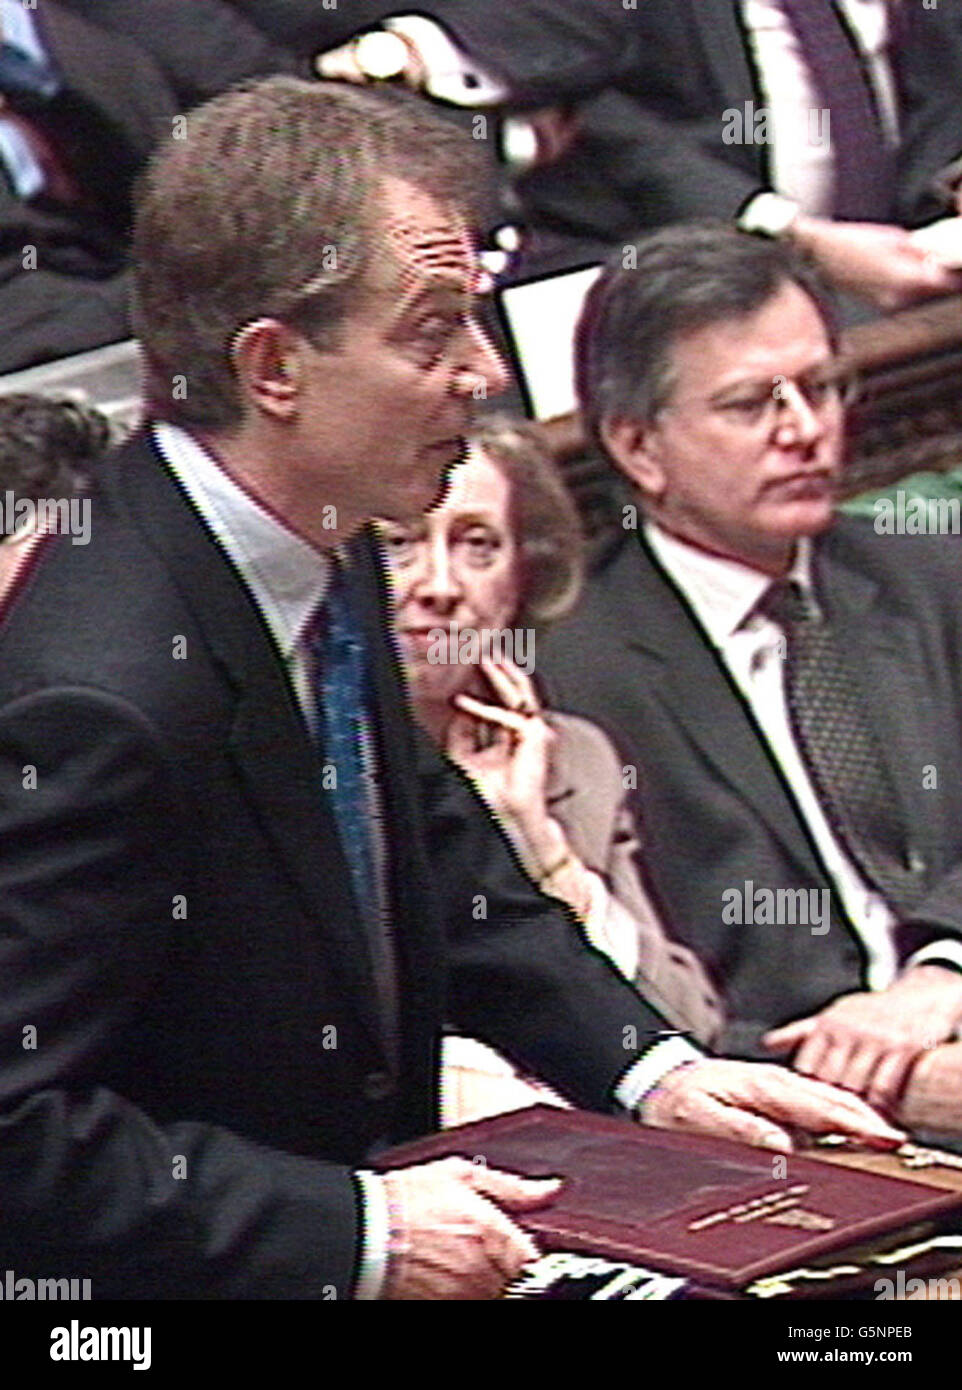 Transport Secretary Stephen Byers (right) who is still at the heart of a controversy regarding the alleged resignation of his departmental communications chief Martin Sixsmith, listens to Prime Minister Tony Blair (left) during Prime Minister's Questions. *... at the House of Commons, London. Stock Photo